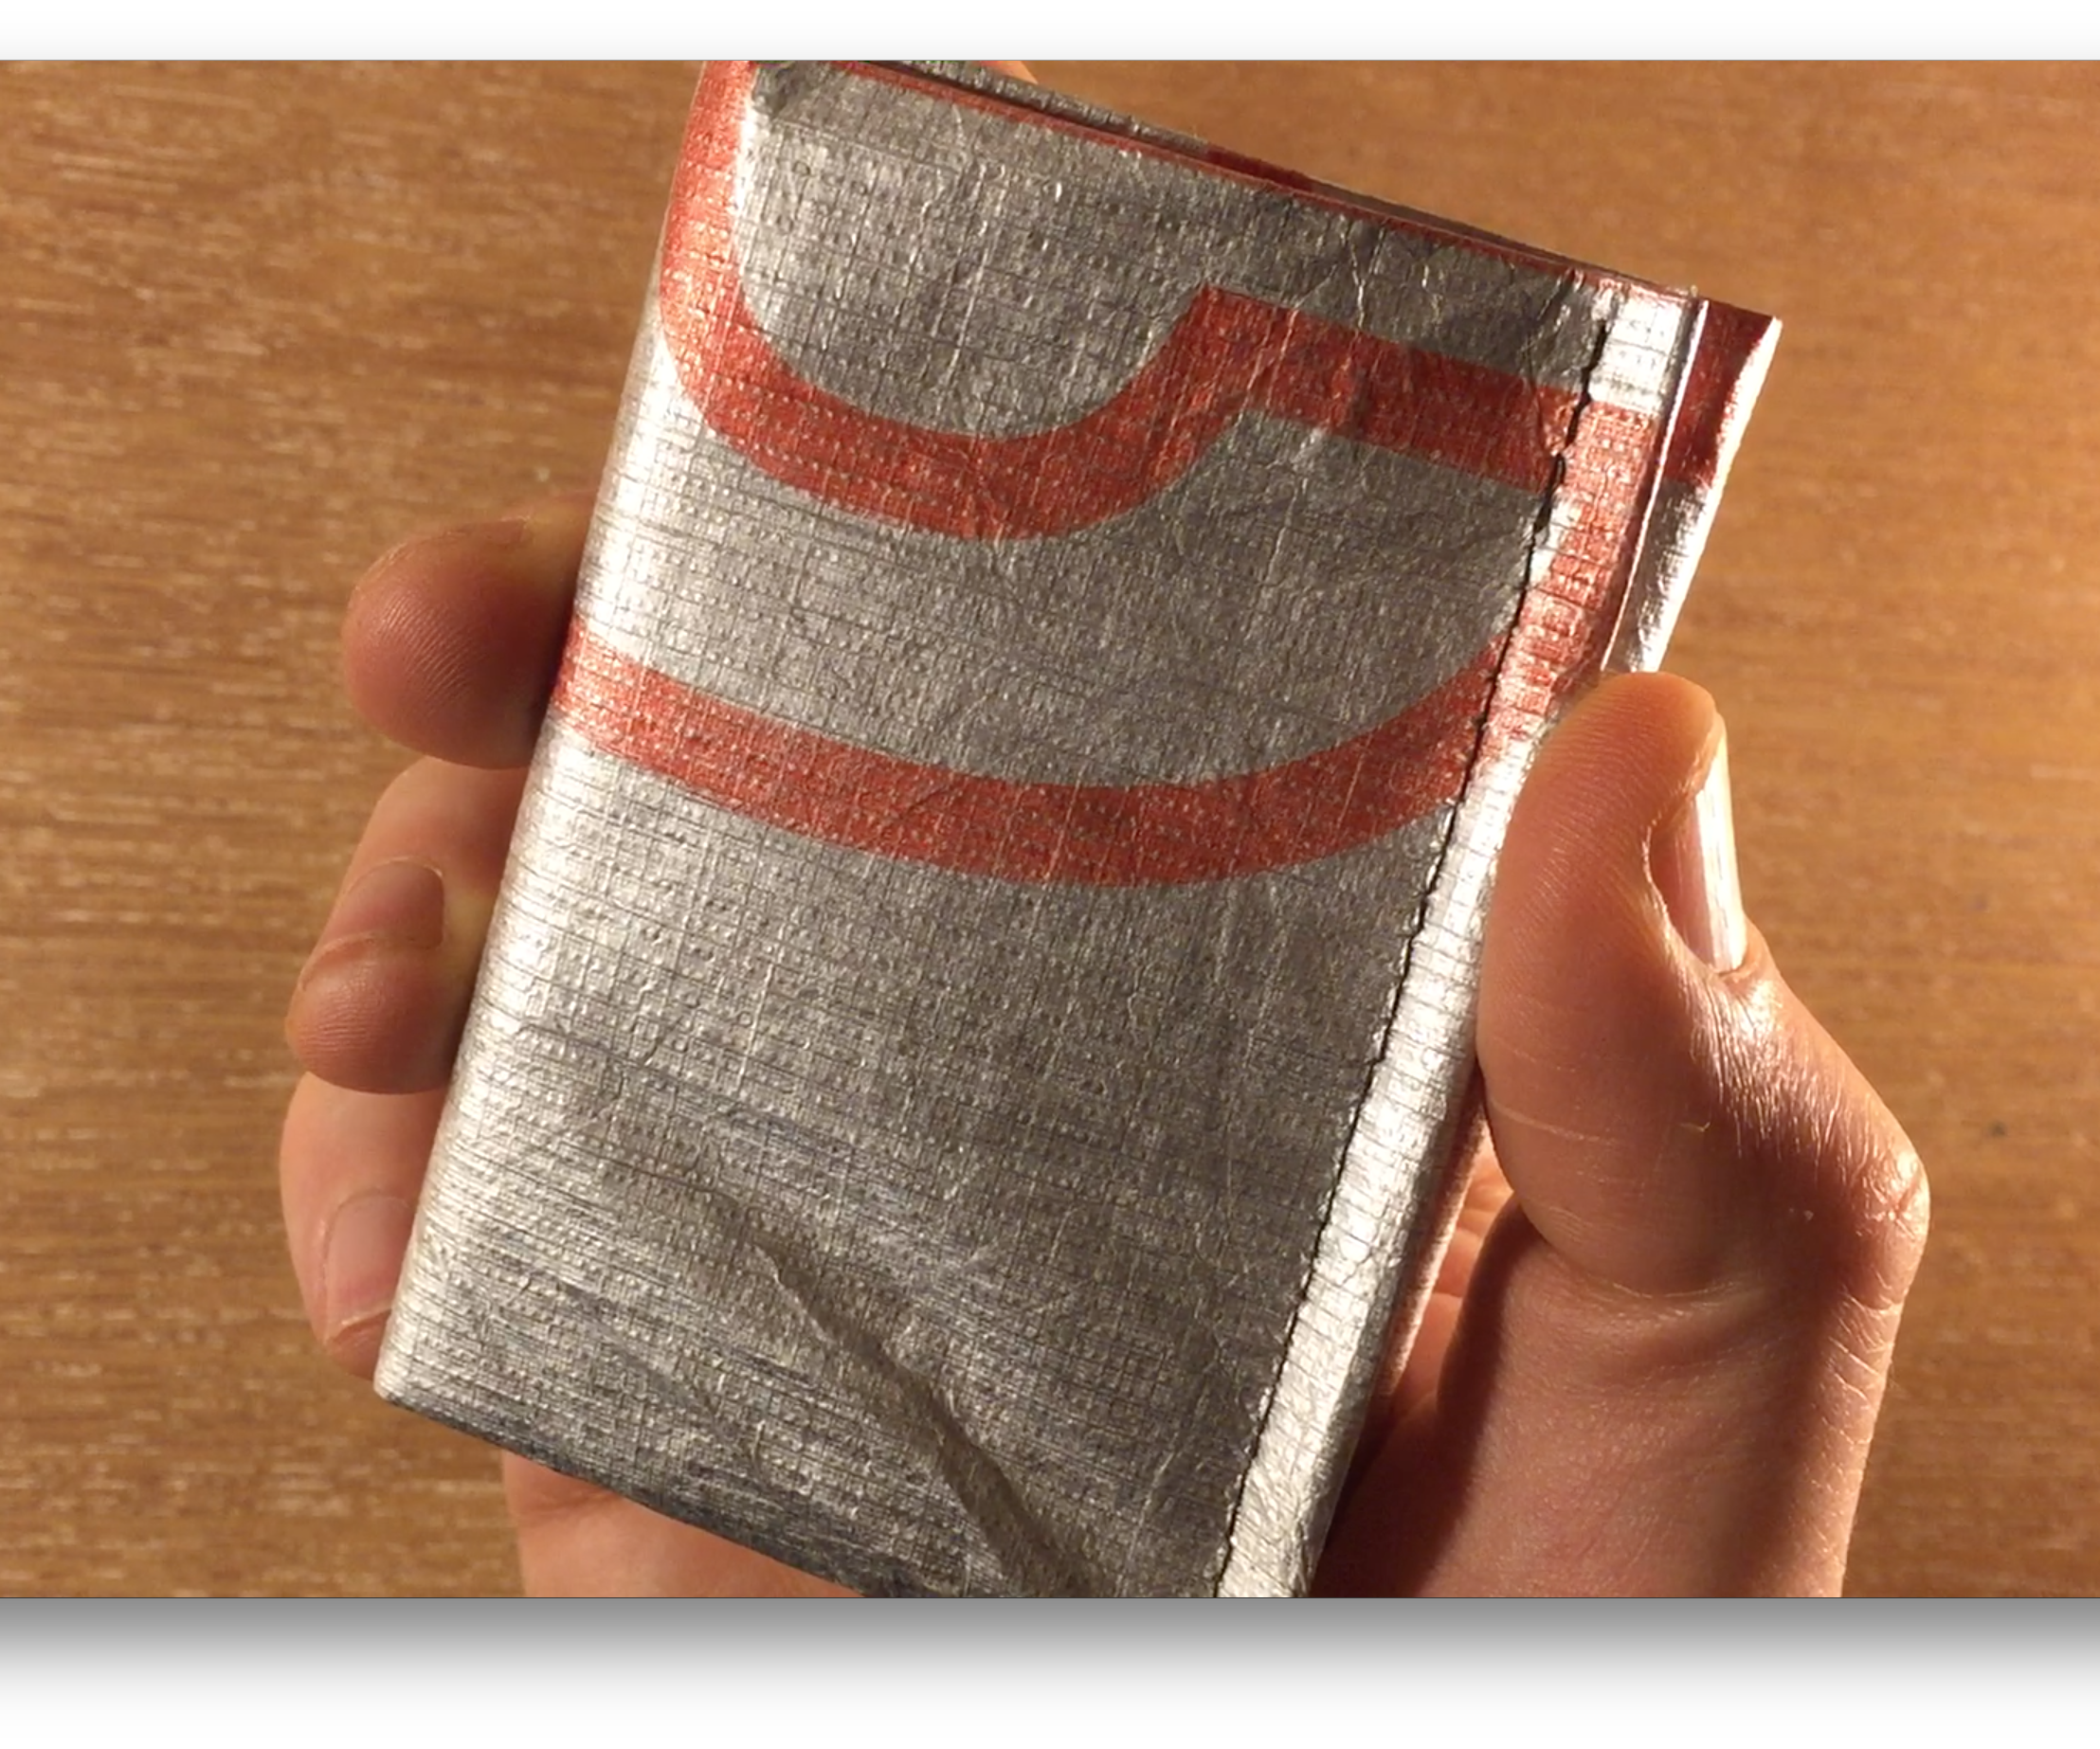 How to Make a Tyvek Wallet